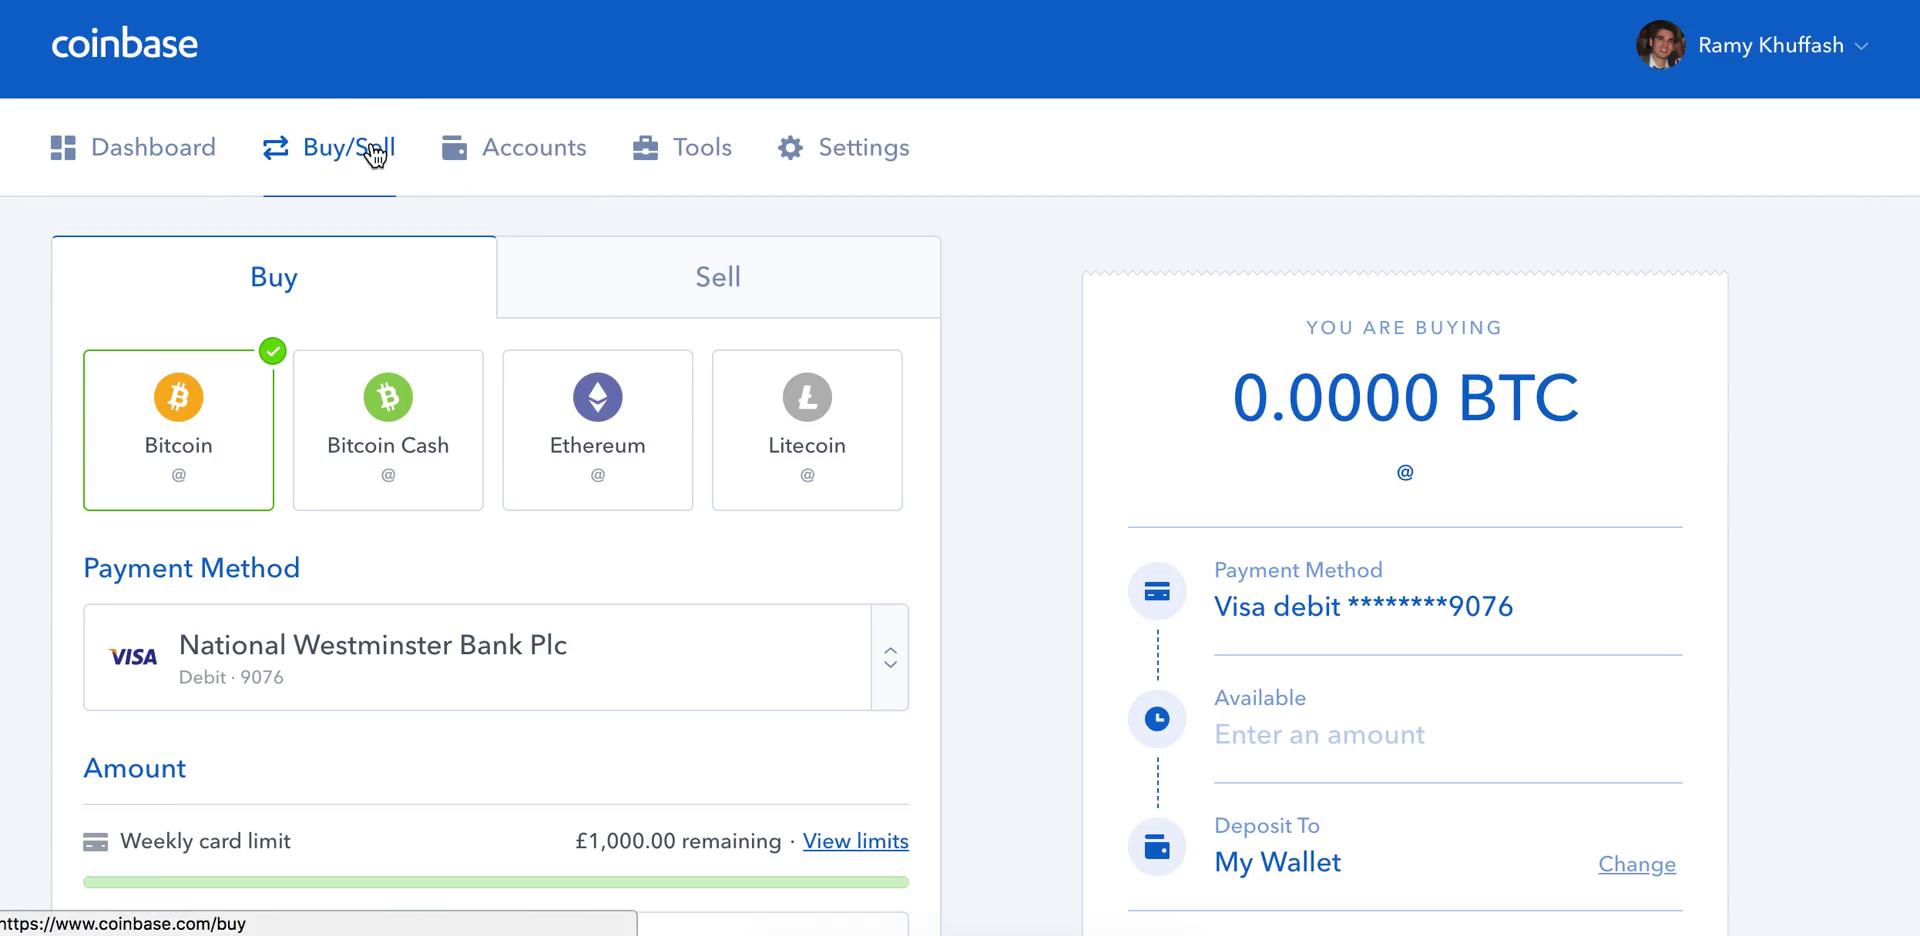 can you buy any crypto on coinbase